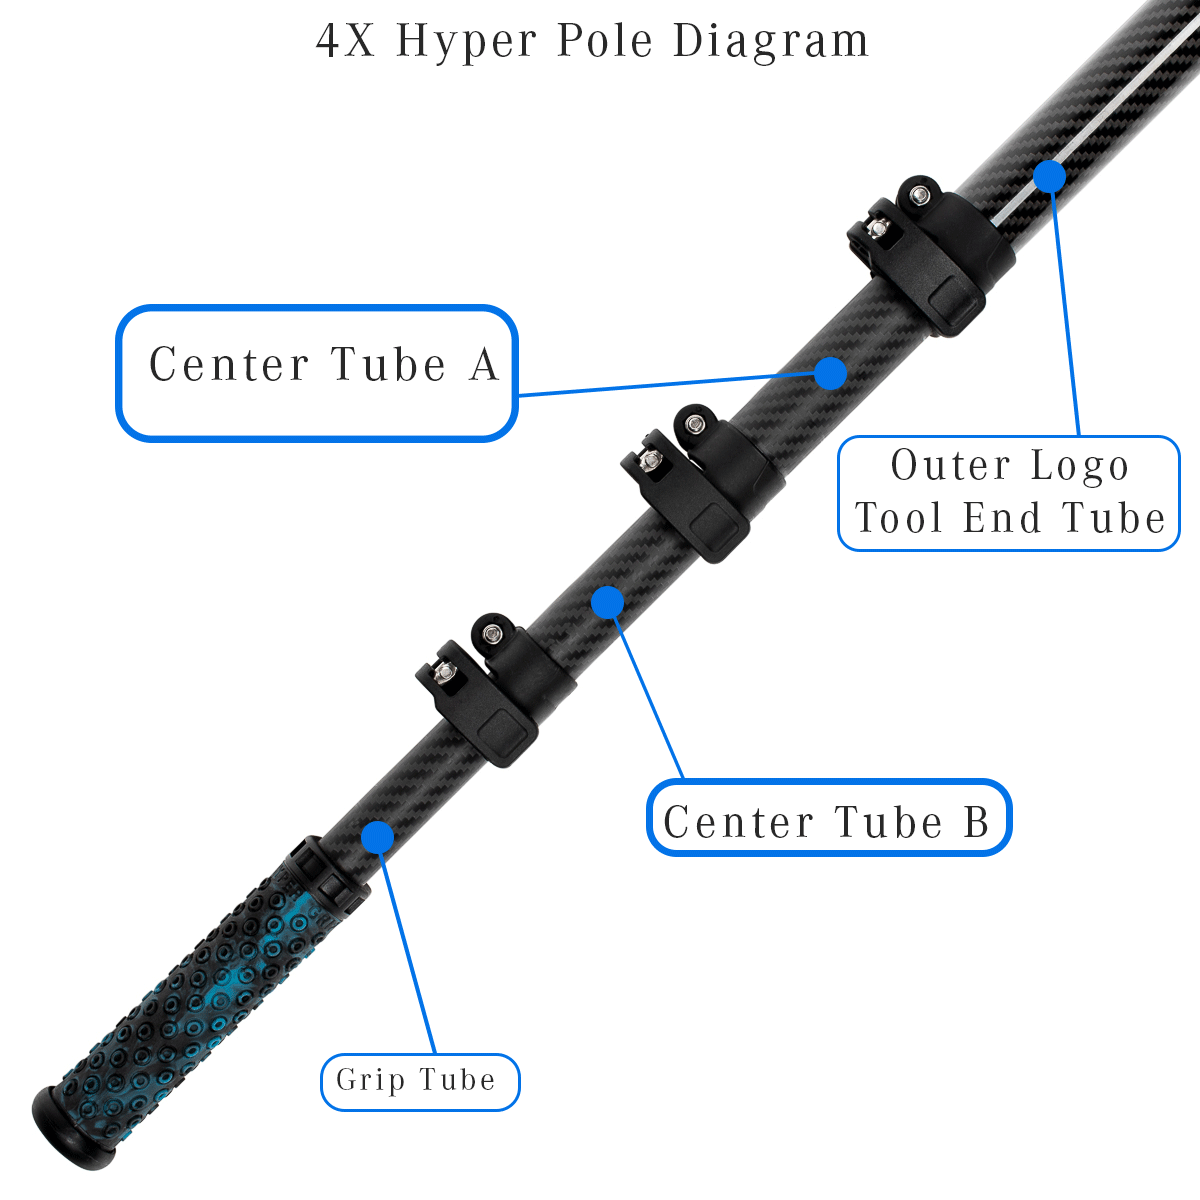 Outer Individual Replacement Tube / Hyper Pole